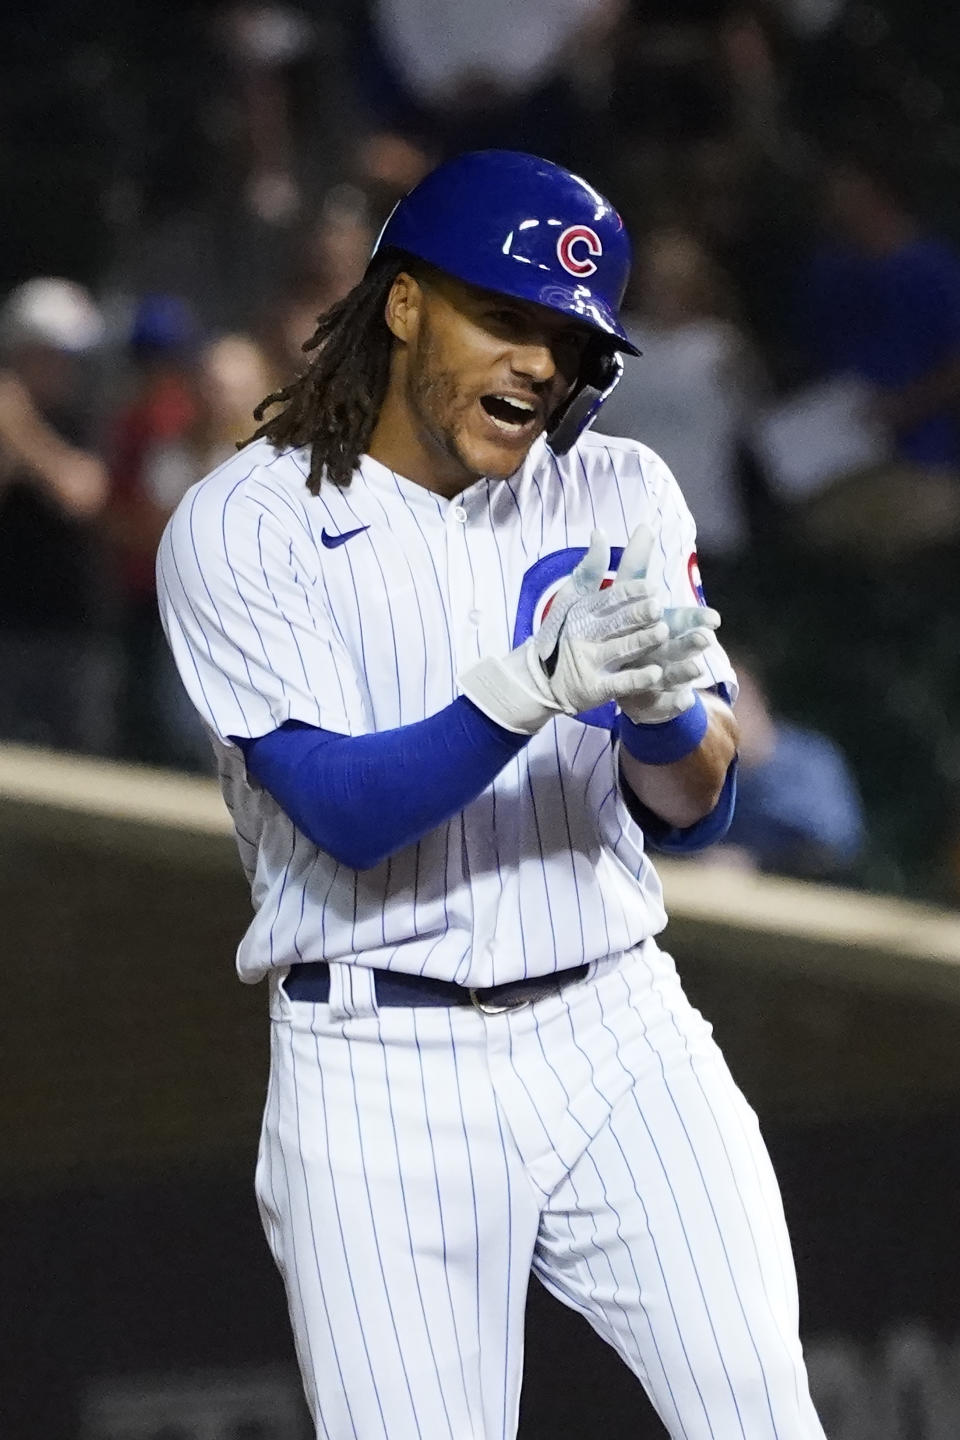 Chicago Cubs' Michael Hermosillo celebrates his RBI double off Colorado Rockies relief pitcher Carlos Estevez during the eighth inning of a baseball game Monday, Aug. 23, 2021, in Chicago. Ian Happ scored on the play. (AP Photo/Charles Rex Arbogast)